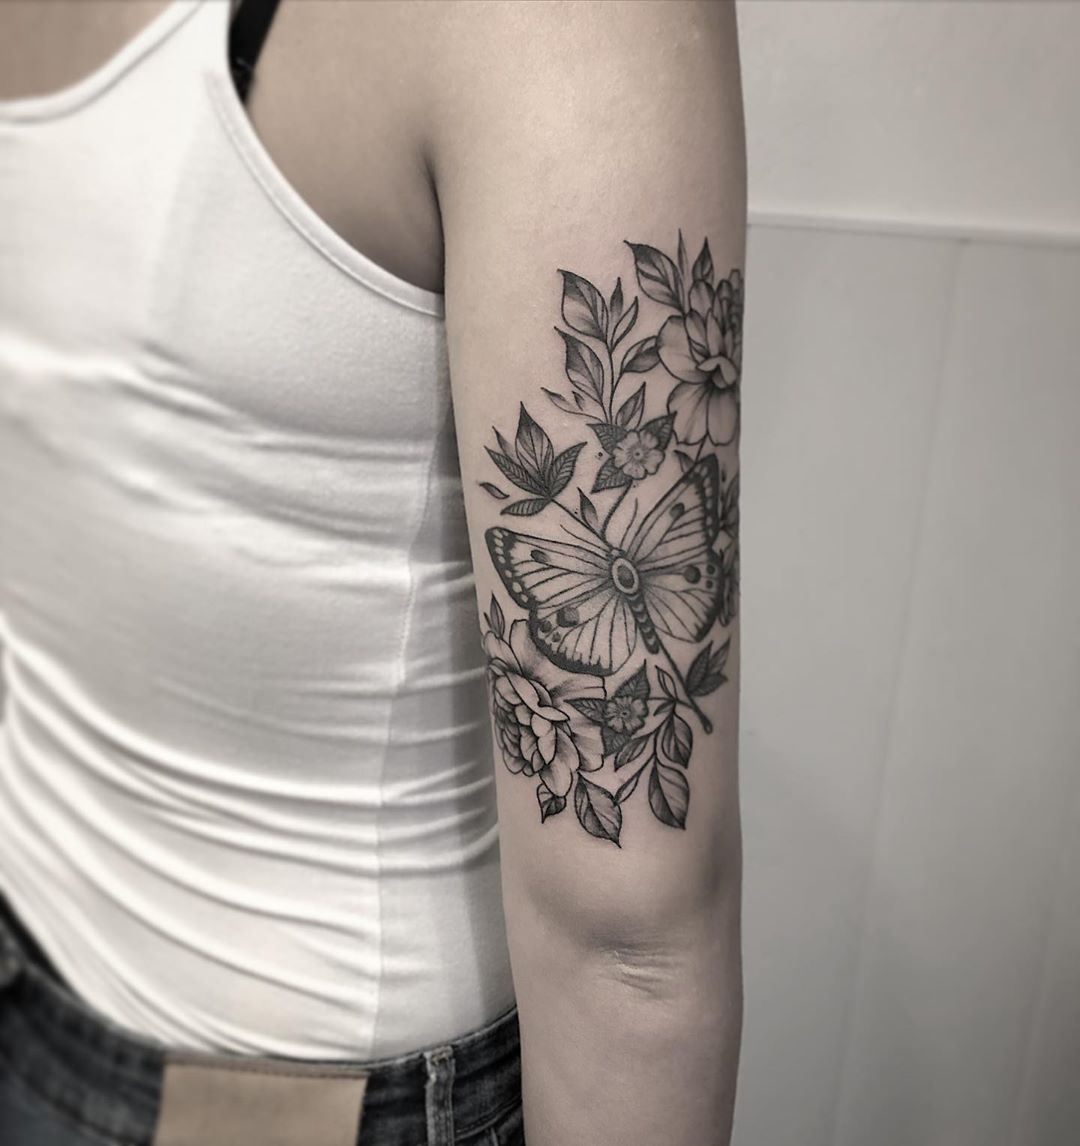 large black and grey tattoo on woman's upper arm of butterfly with flowers and leaves around it